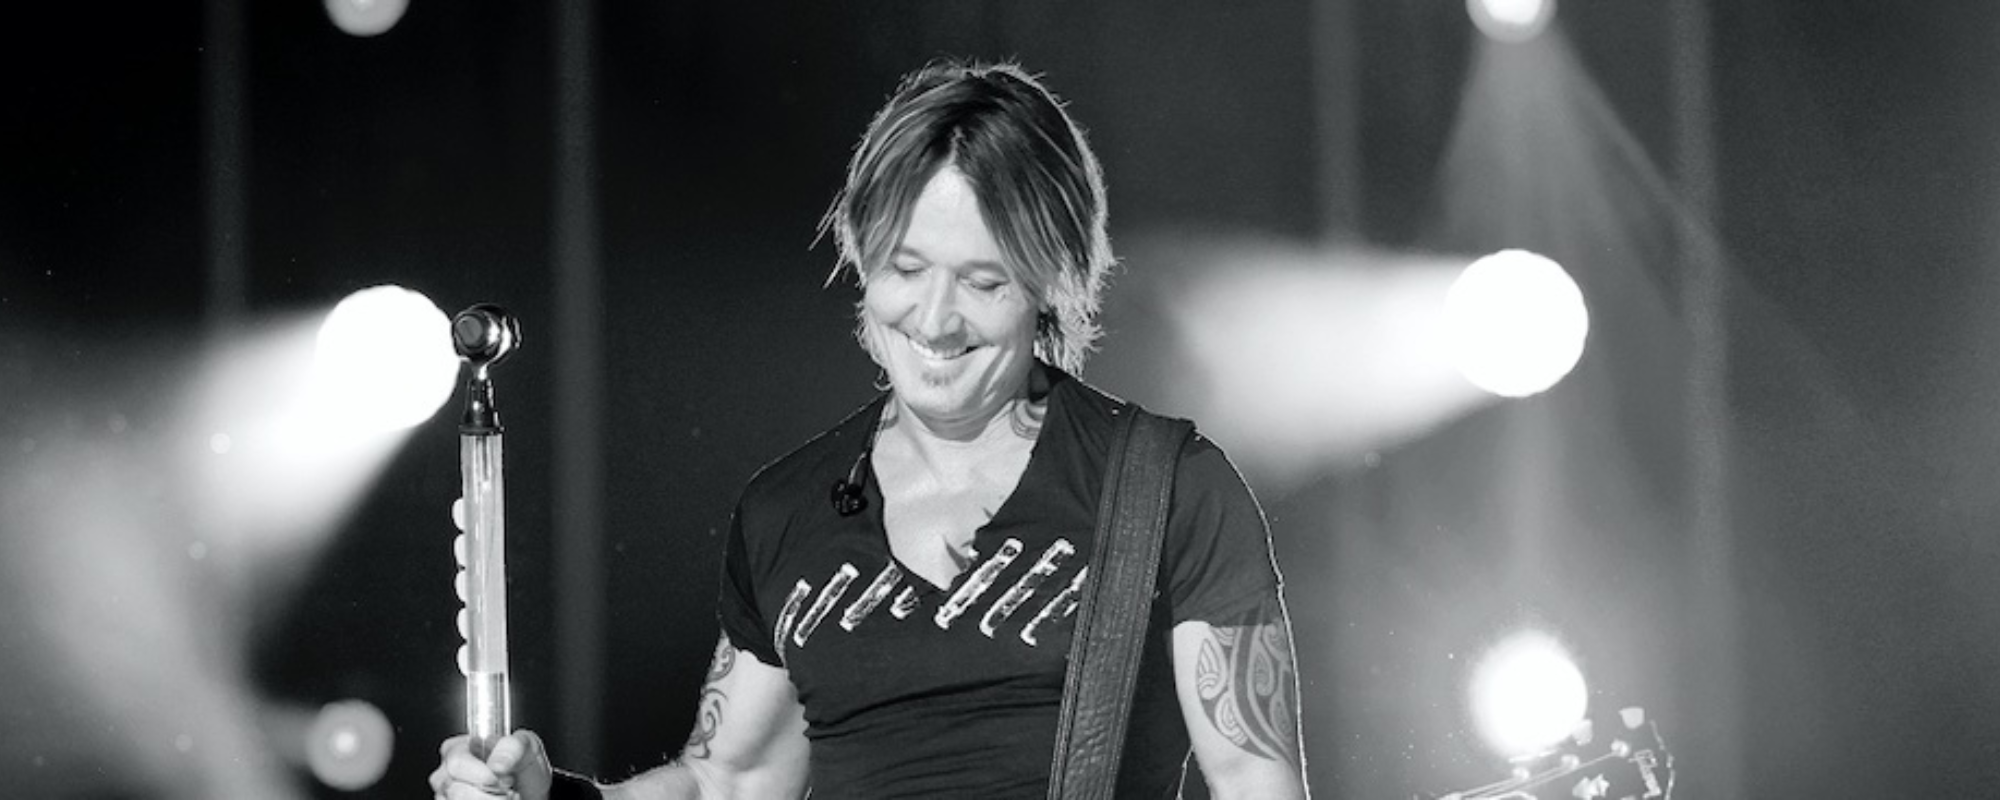 Keith Urban on Songwriting: “The Song is the Beginning of Everything”